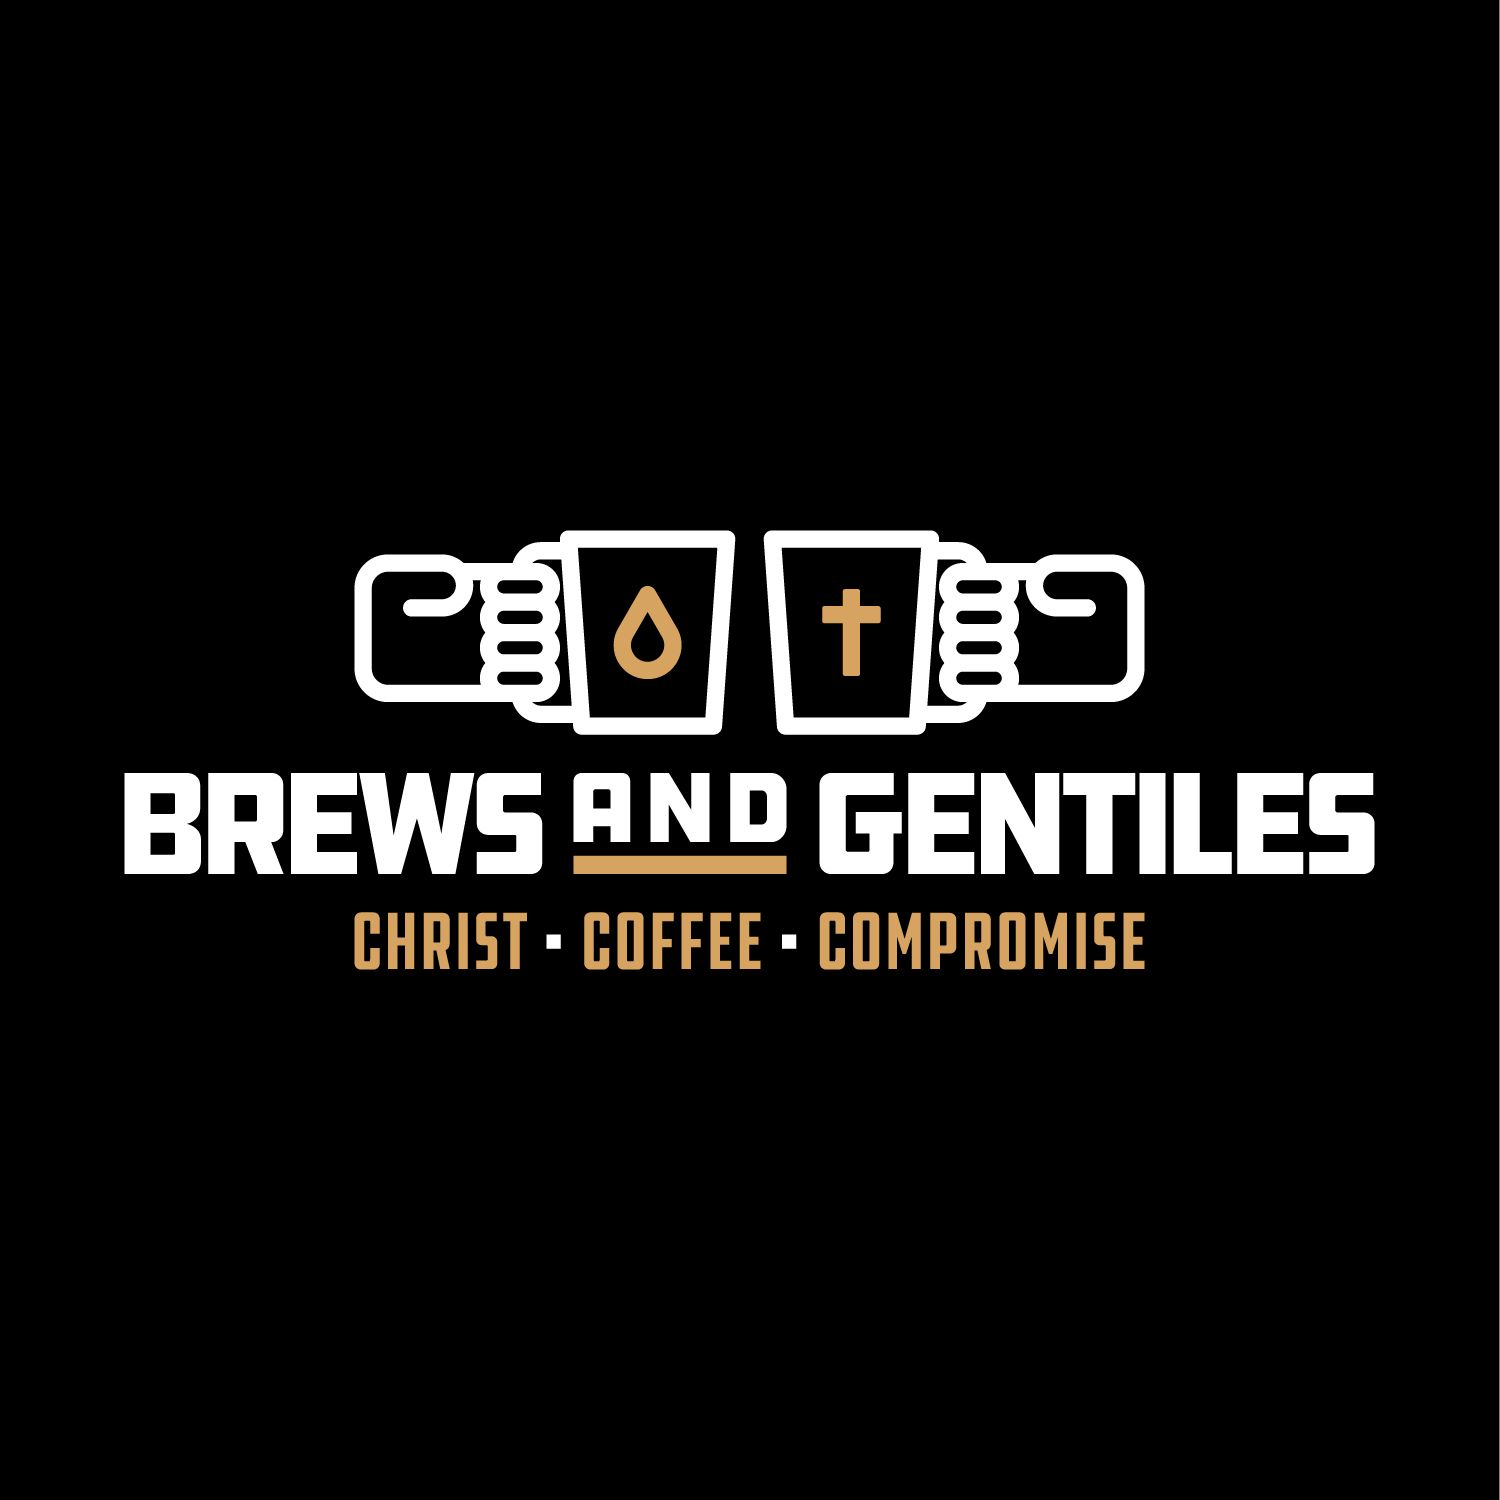 Brews and Gentiles